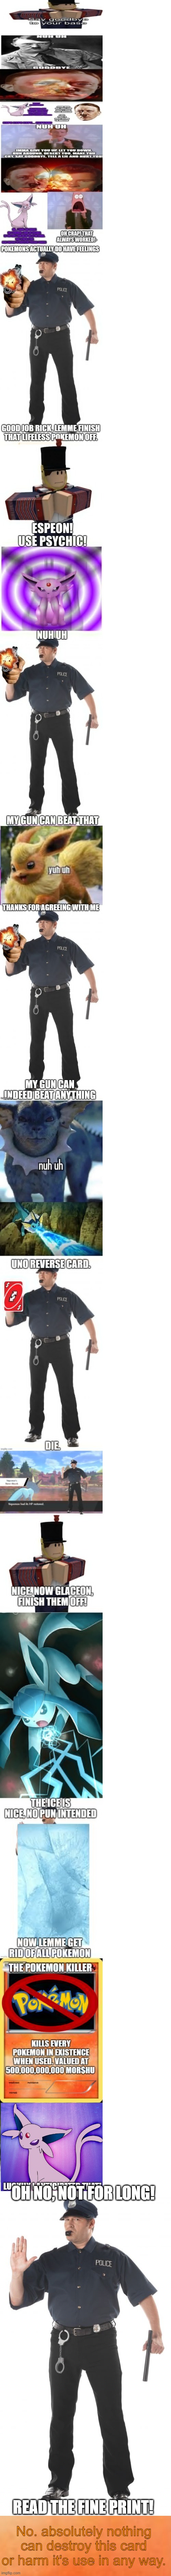 OH NO, NOT FOR LONG! READ THE FINE PRINT! No. absolutely nothing can destroy this card or harm it's use in any way. | image tagged in memes,stop cop,blank pokemon card | made w/ Imgflip meme maker